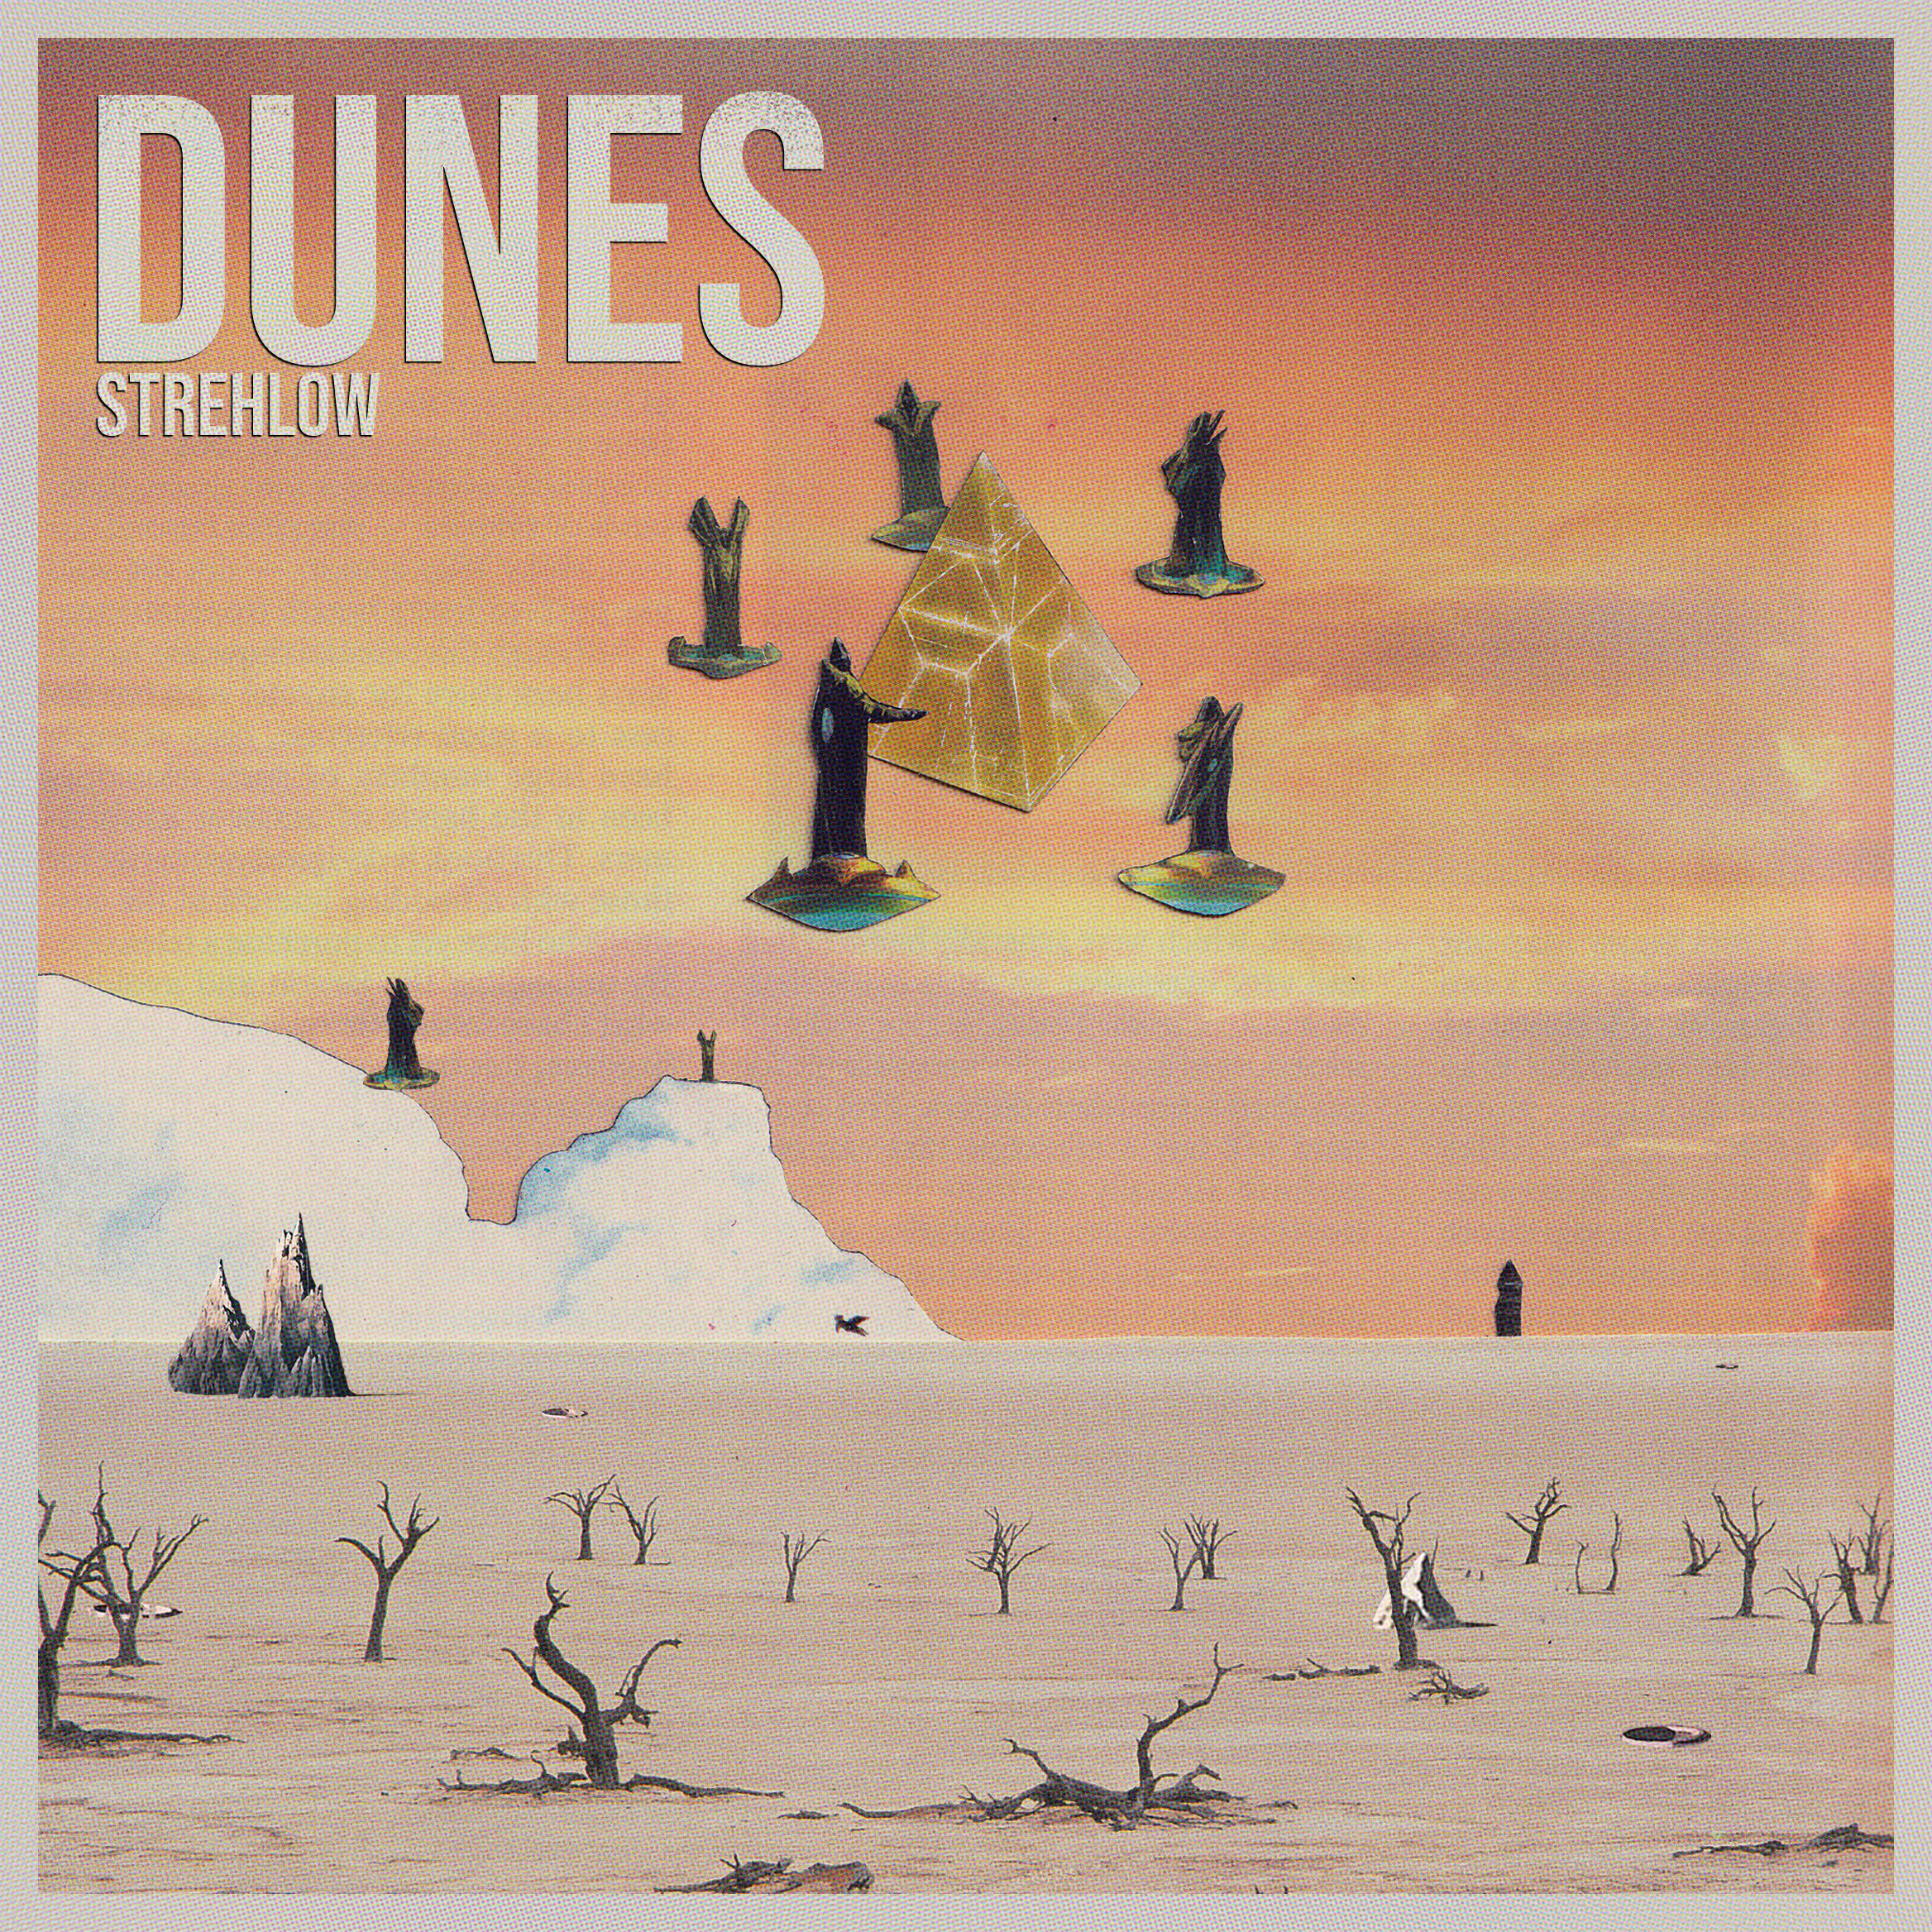 Cover art for Strehlow's song: Dunes